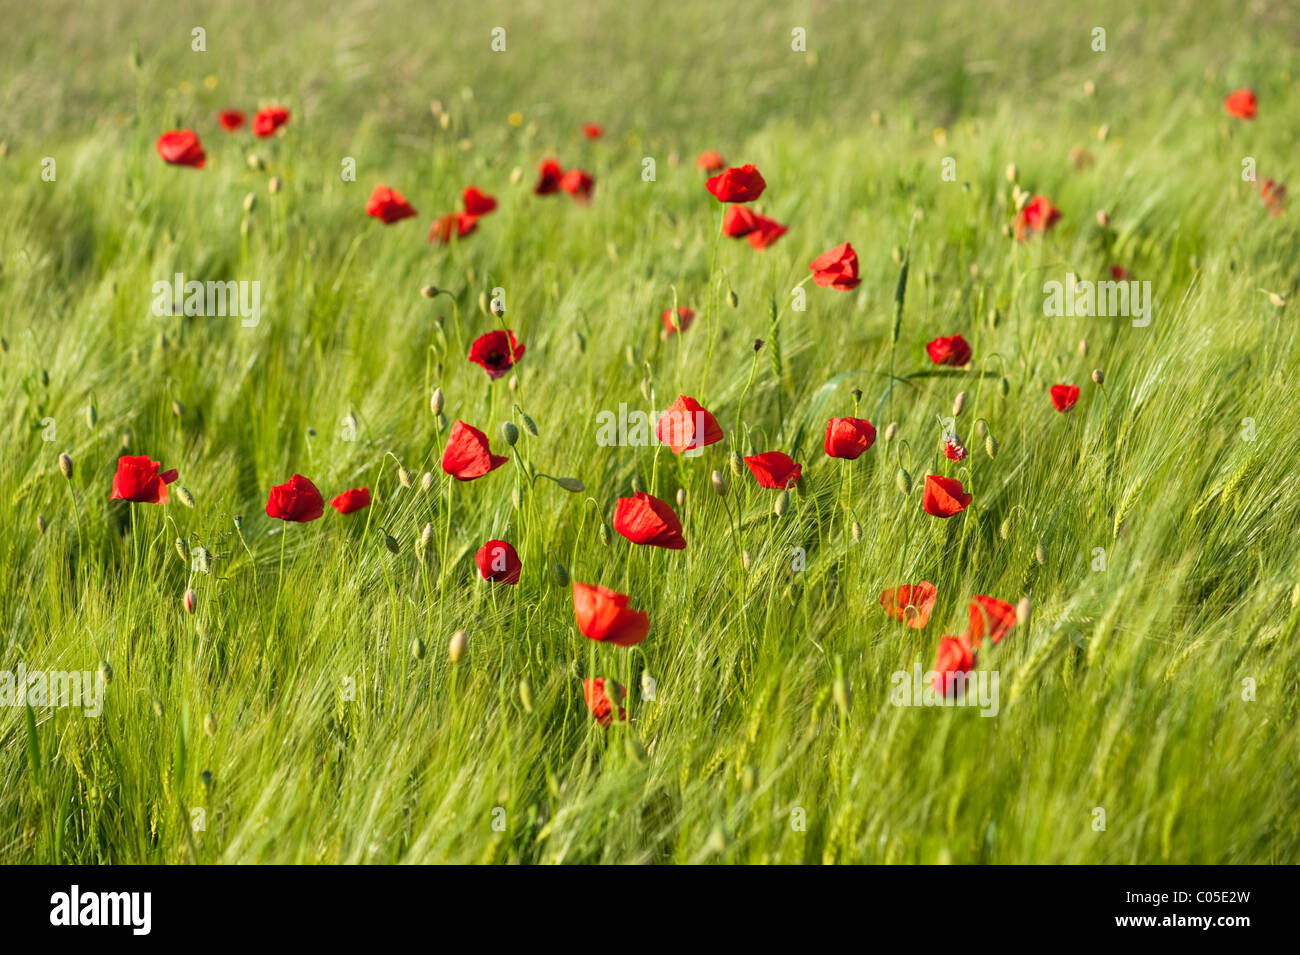 Red vivid poppies on green wheat field in a windy day. Stock Photo